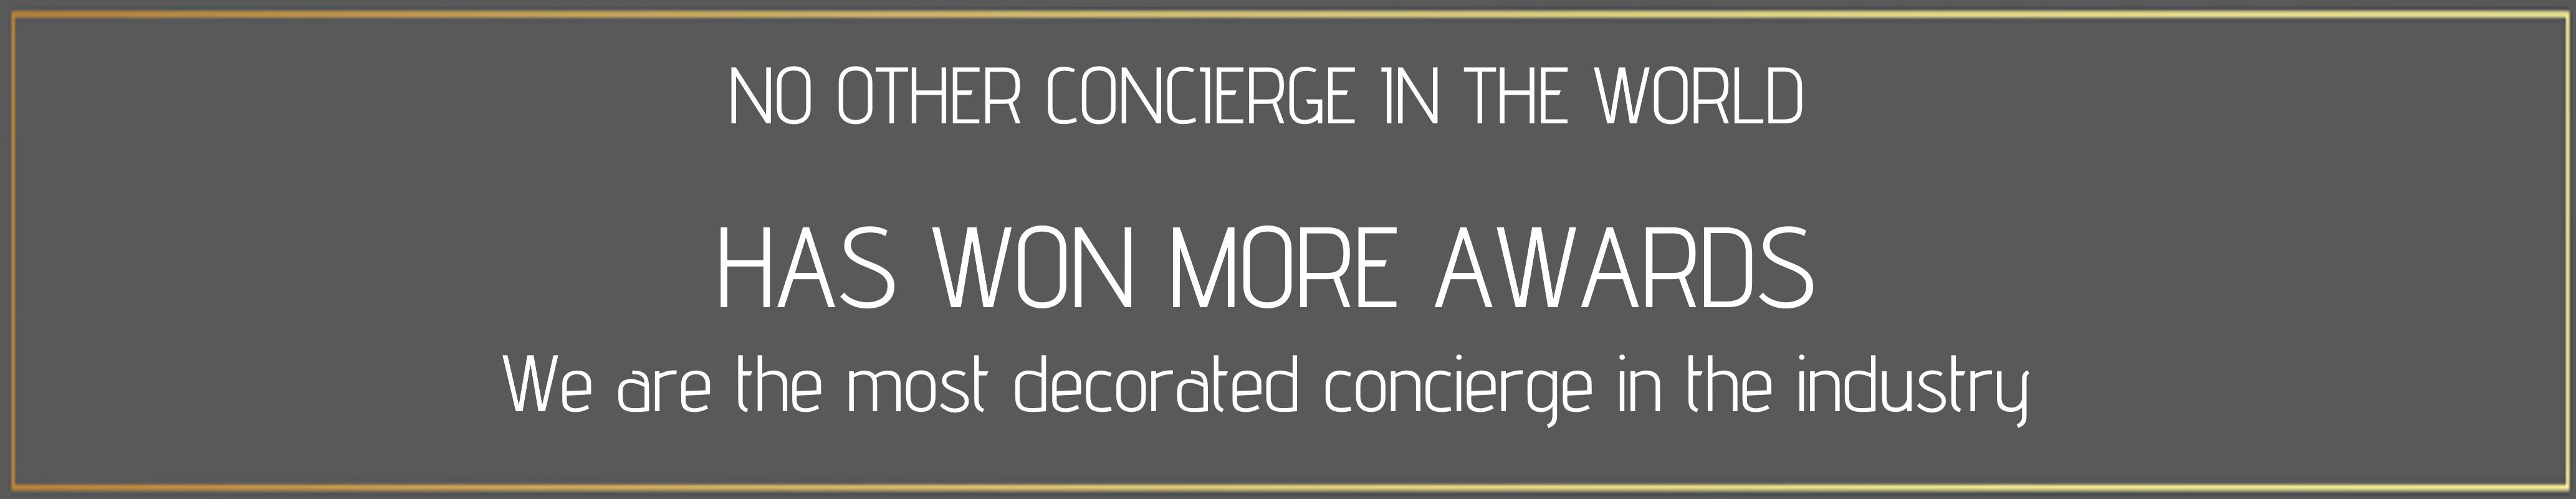 sincura has won the most indtsry awards out of any concierge company